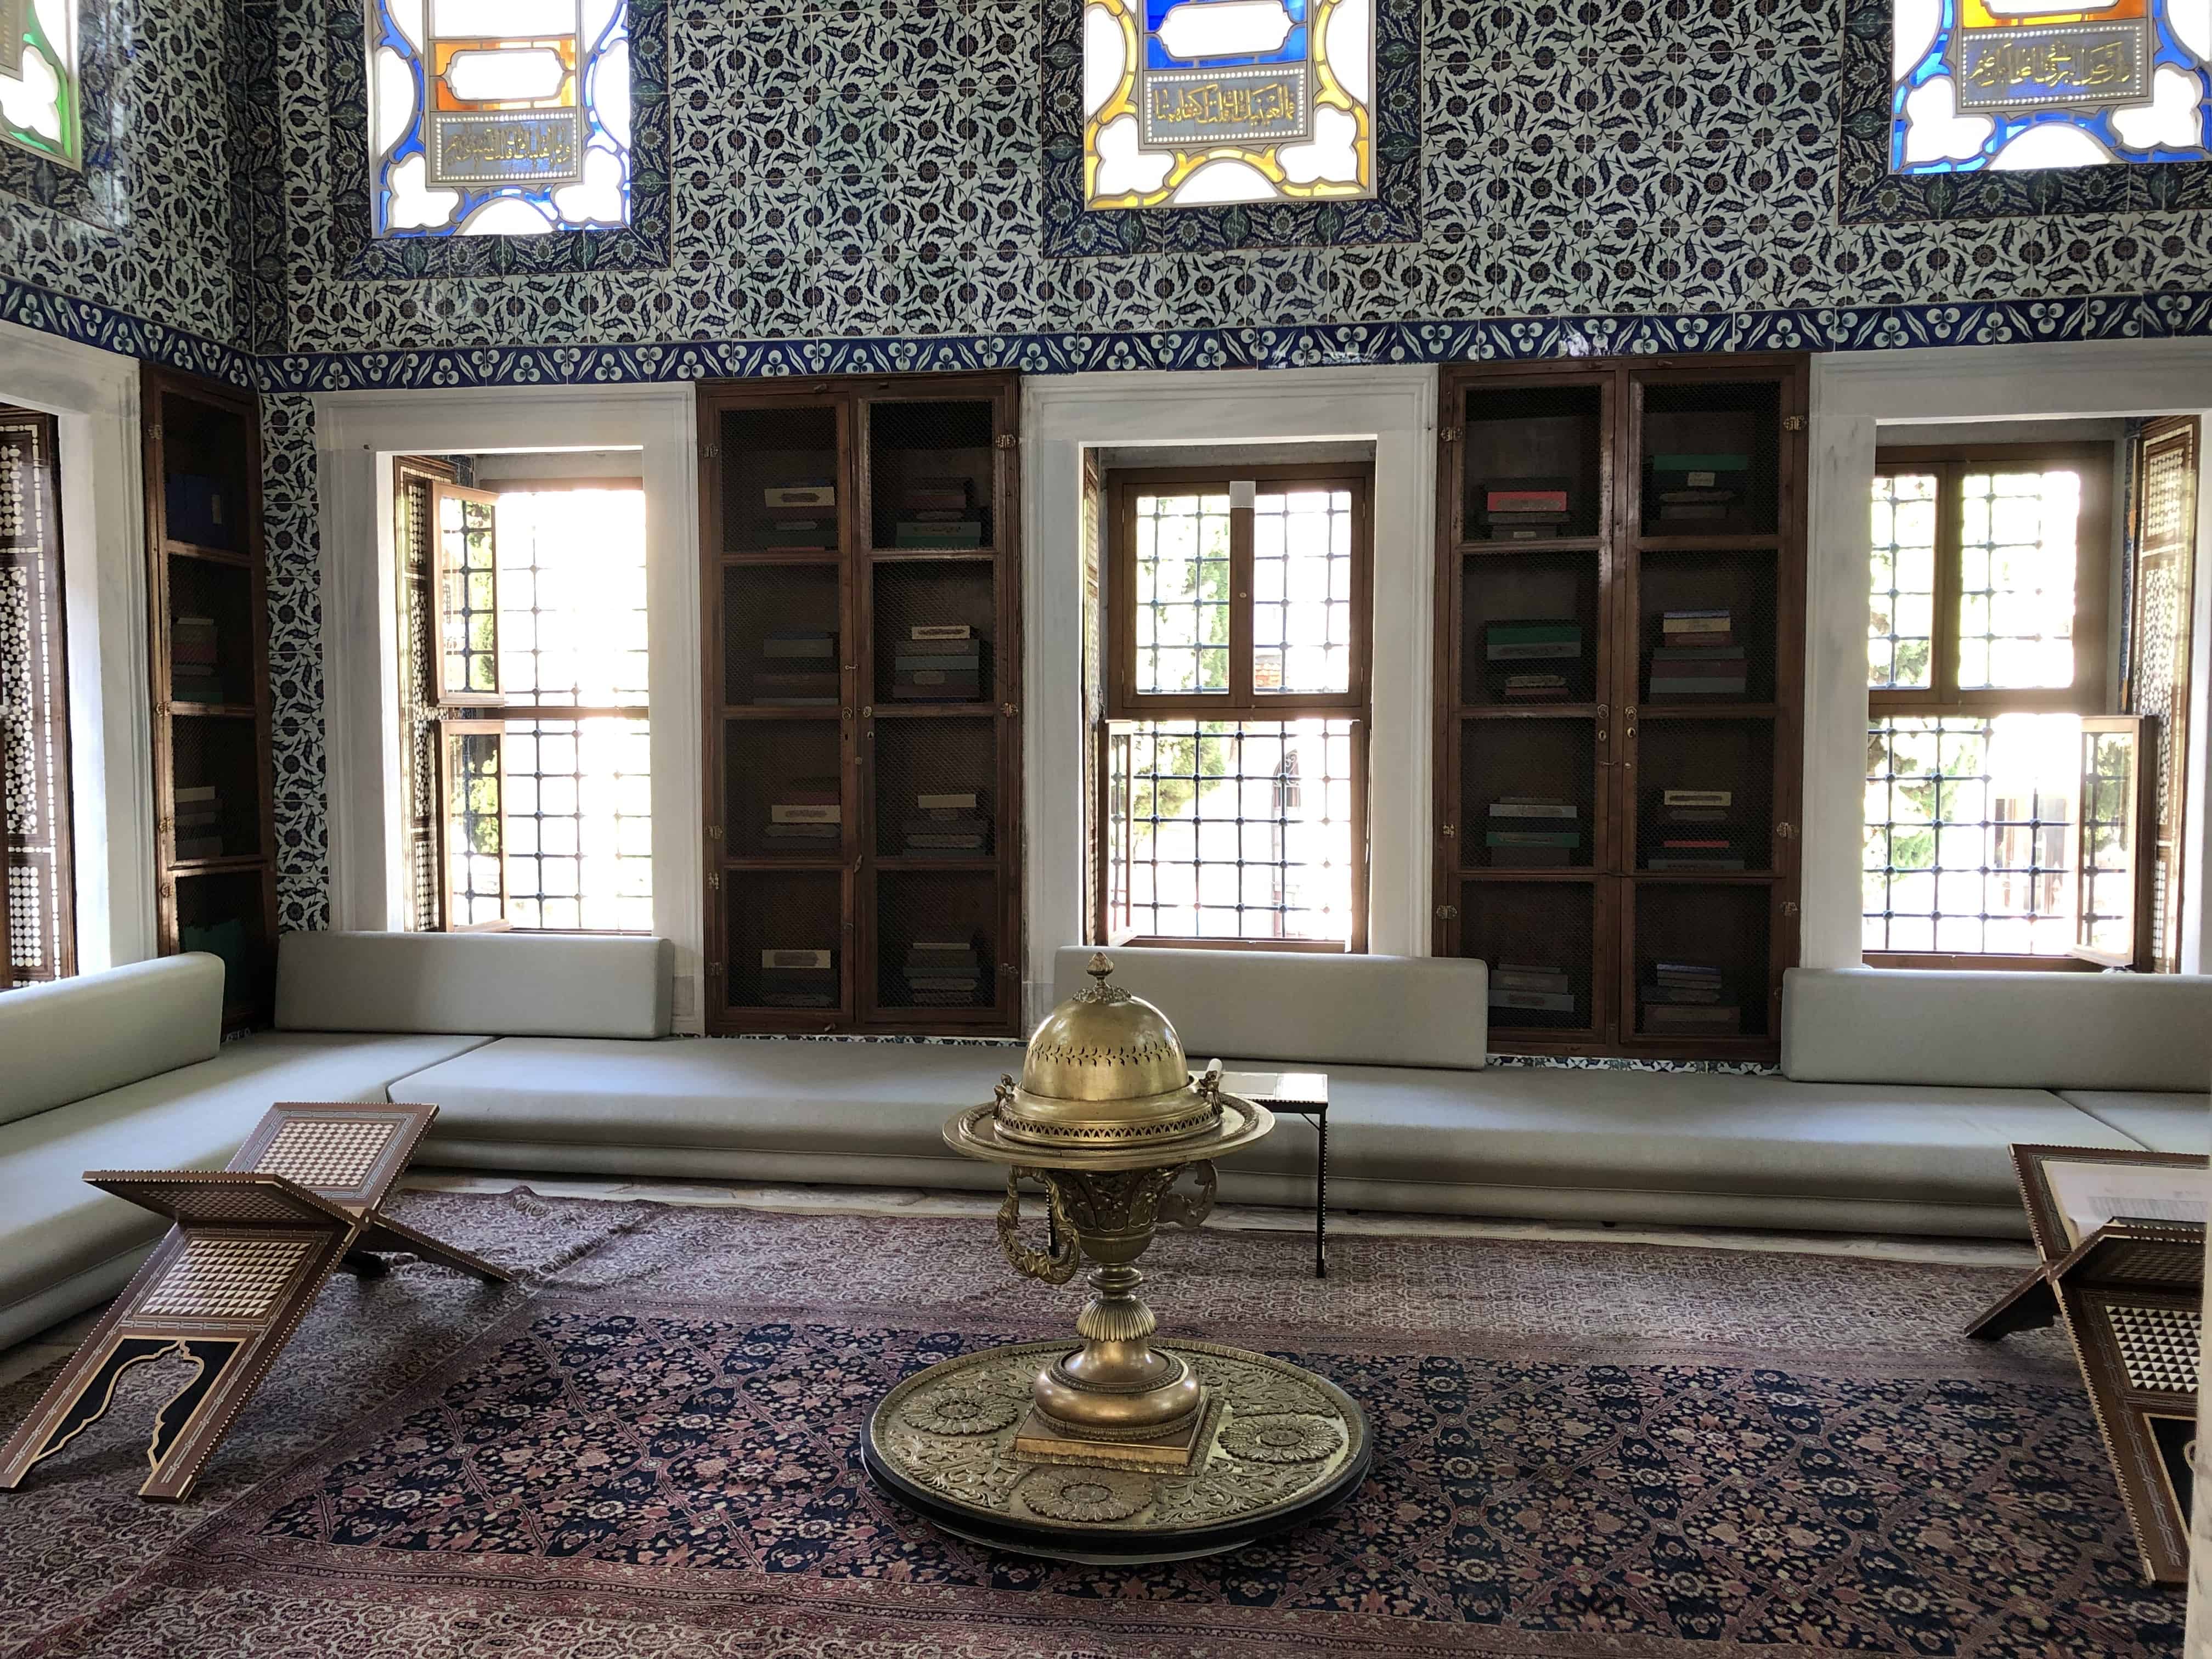 Reading area at the Enderûn Library at Topkapi Palace in Istanbul, Turkey